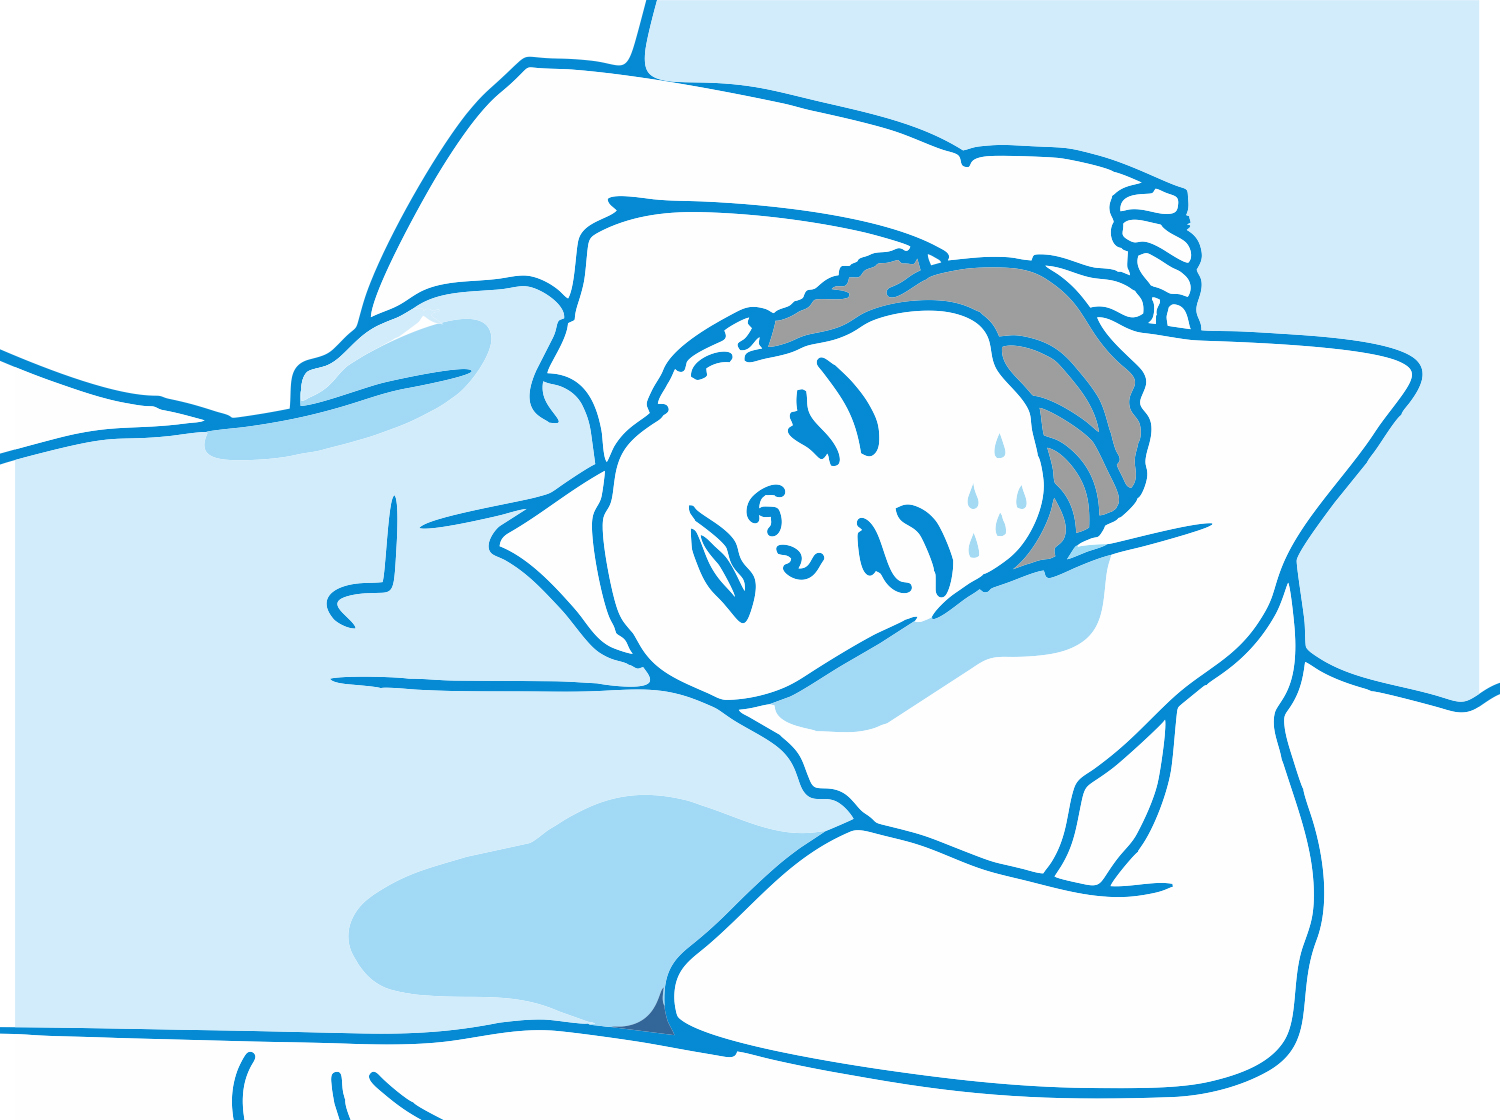 Latex pillows, sweating during sleep, cervical spine pain